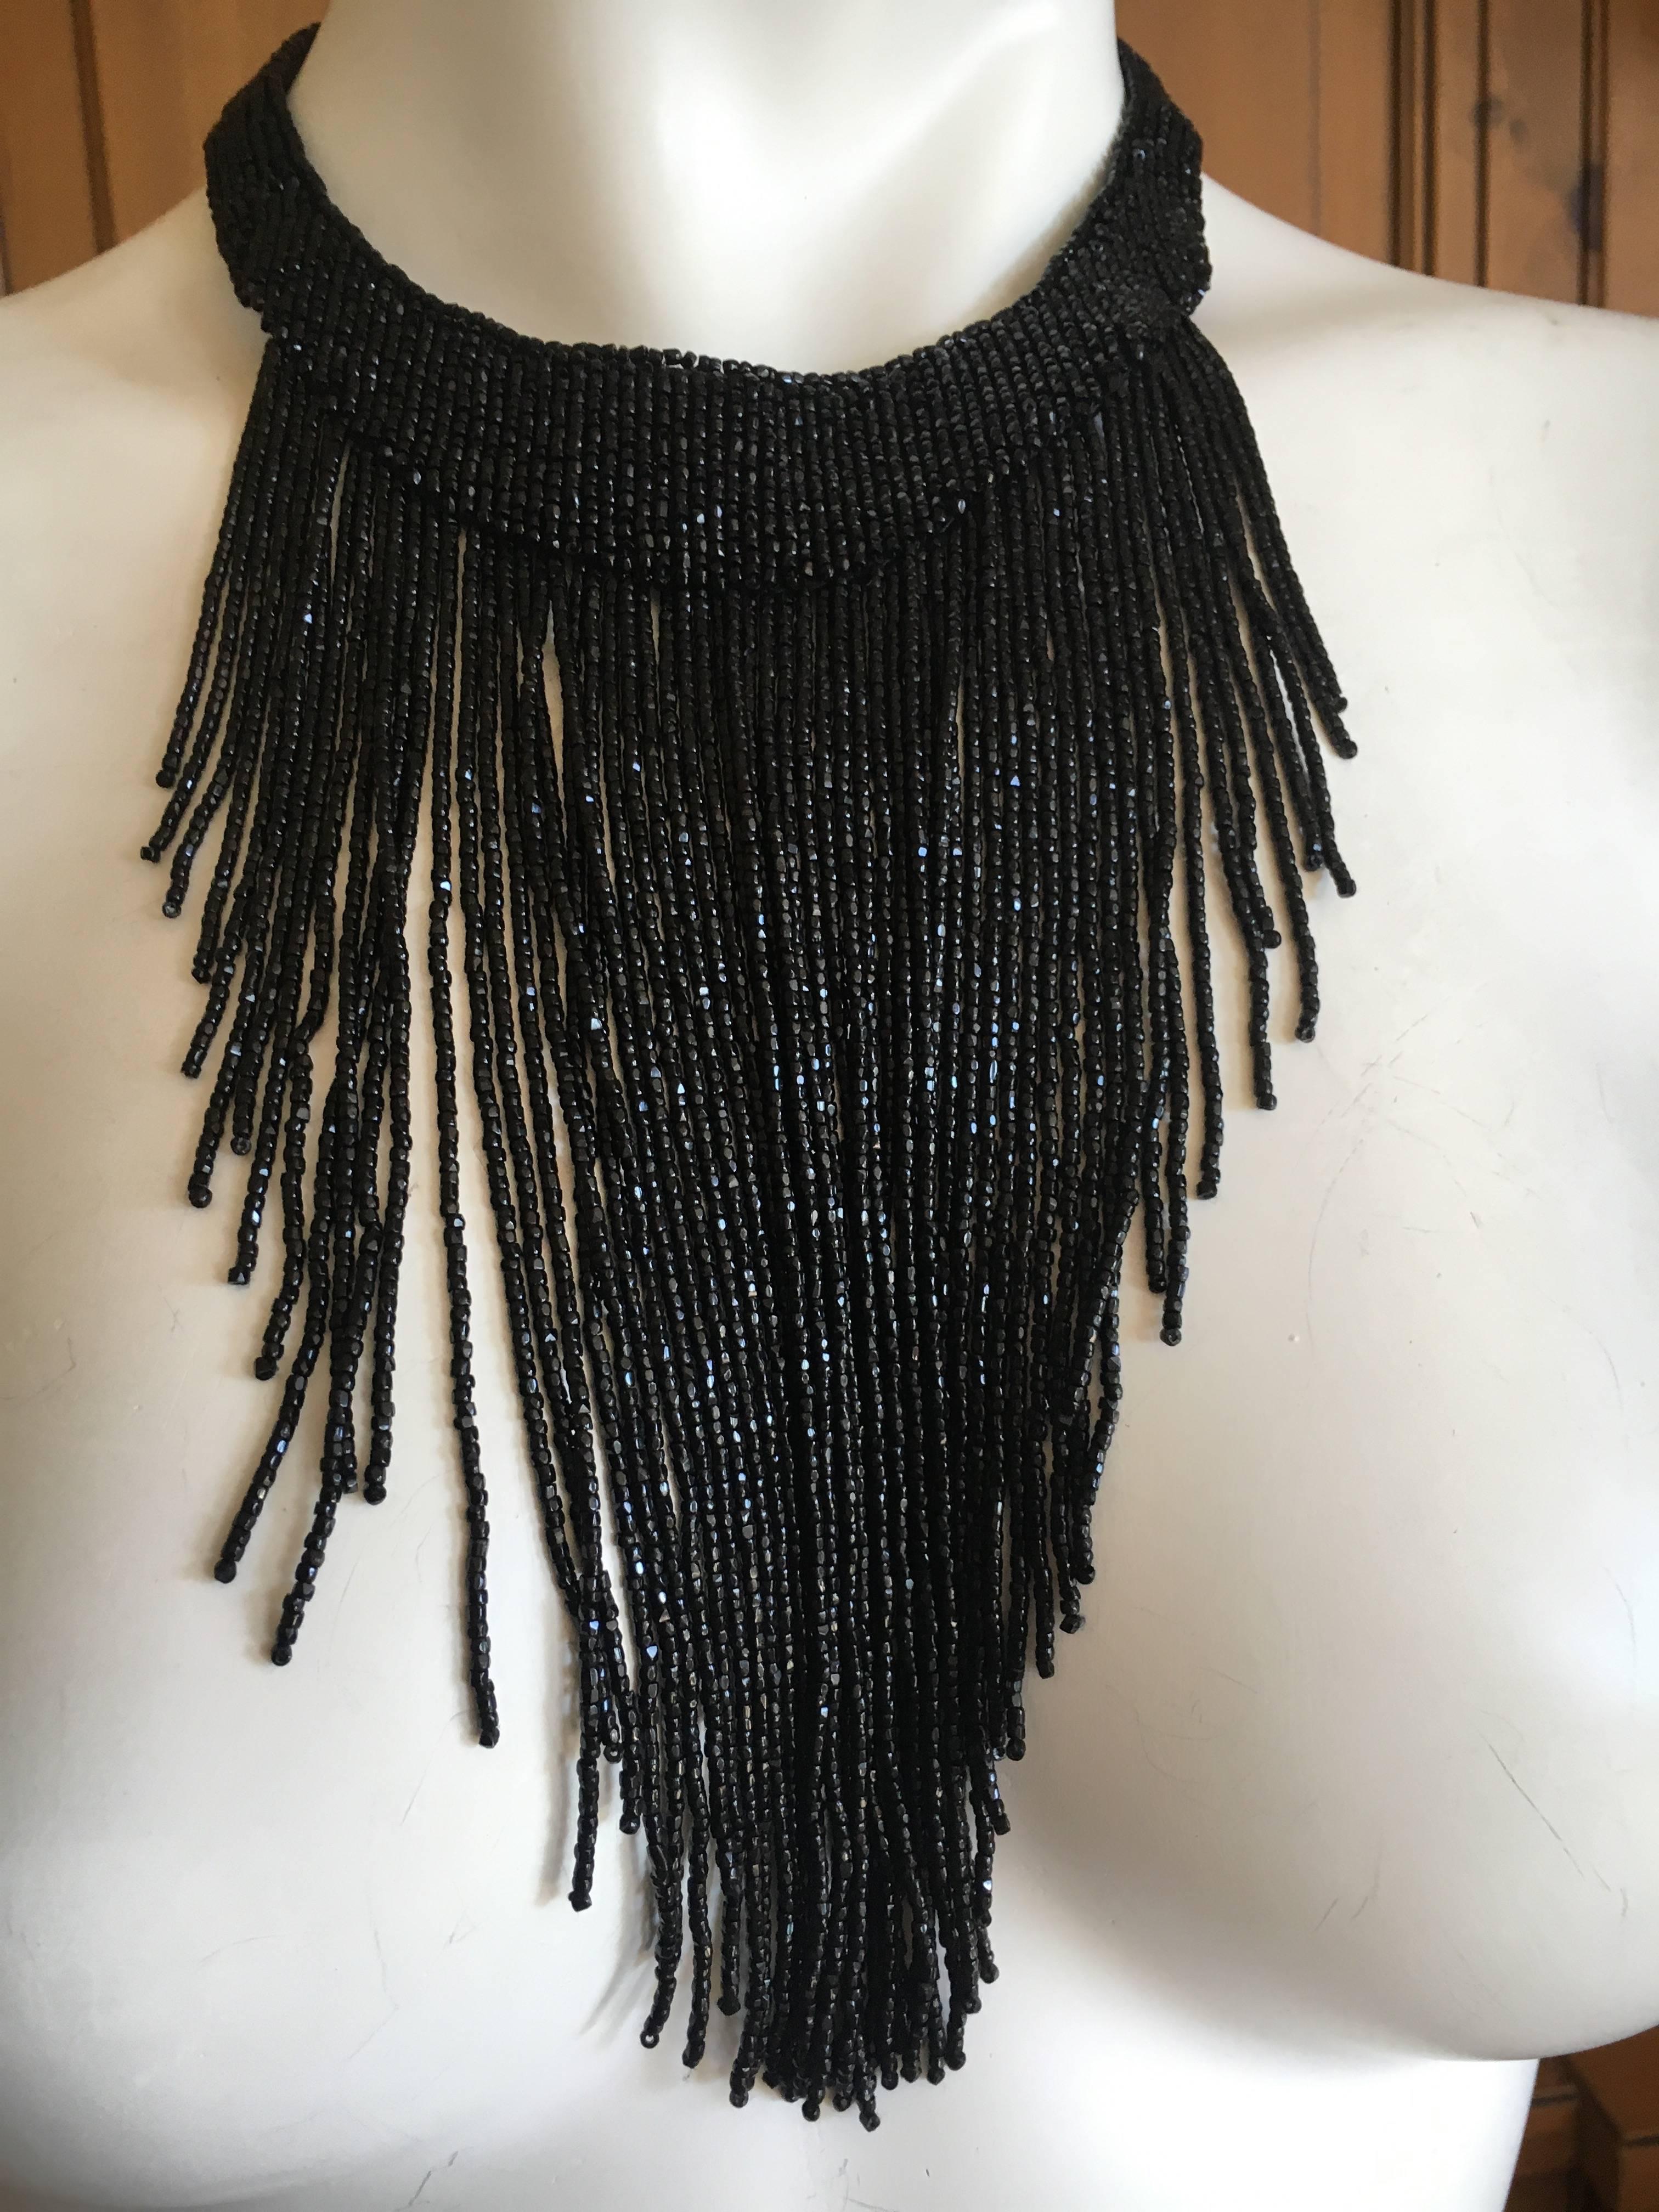 Christian Dior by John Galliano Outstanding Glass Jet Bead Fringed Bib Necklace 1